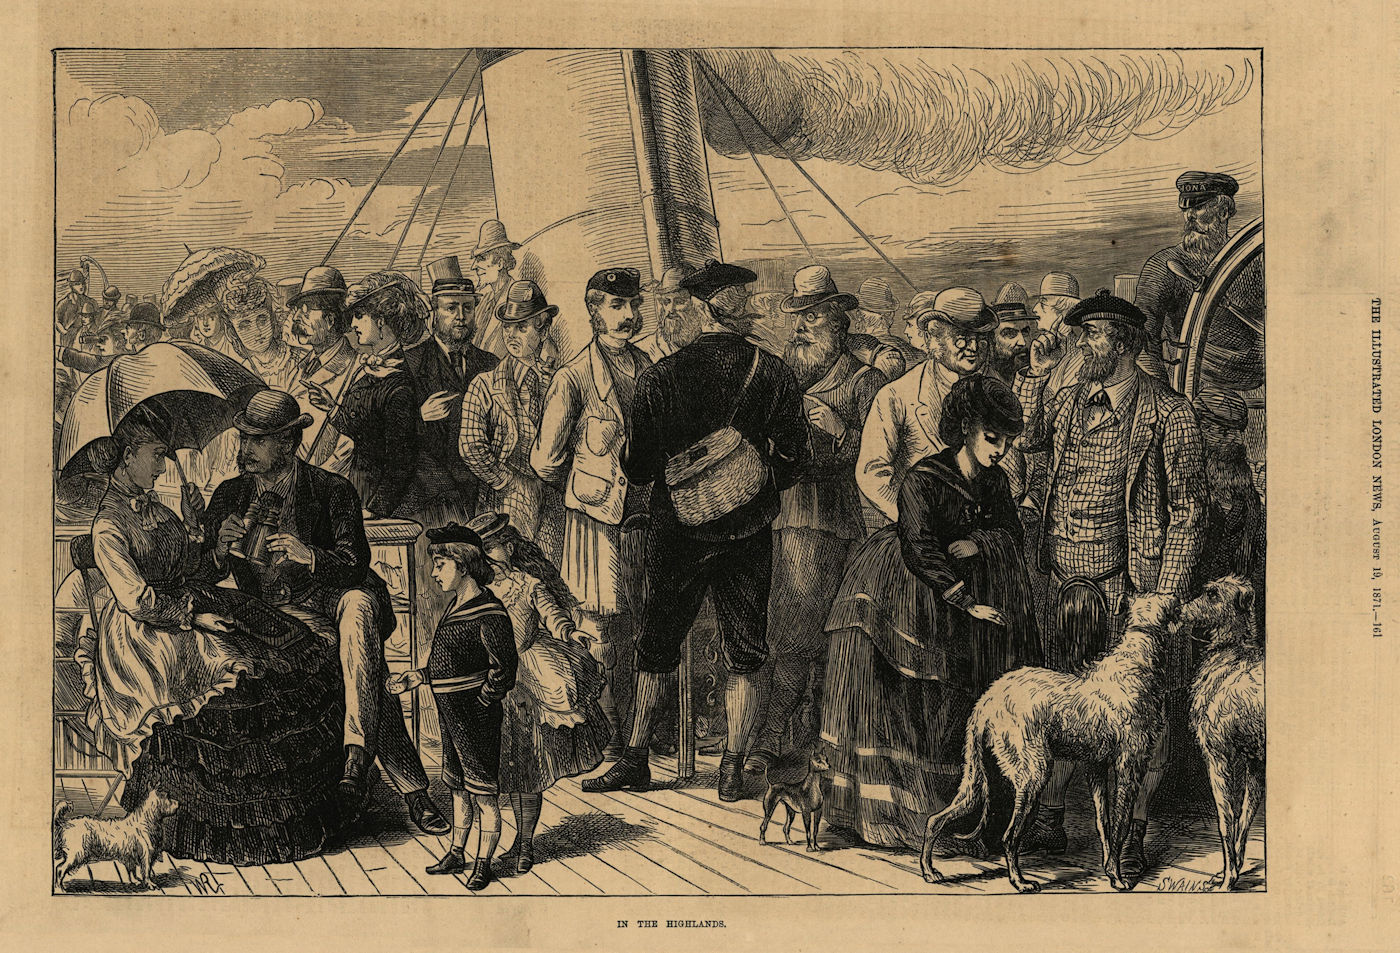 Associate Product On a boat in the Highlands. Scotland. Society 1871 antique ILN full page print